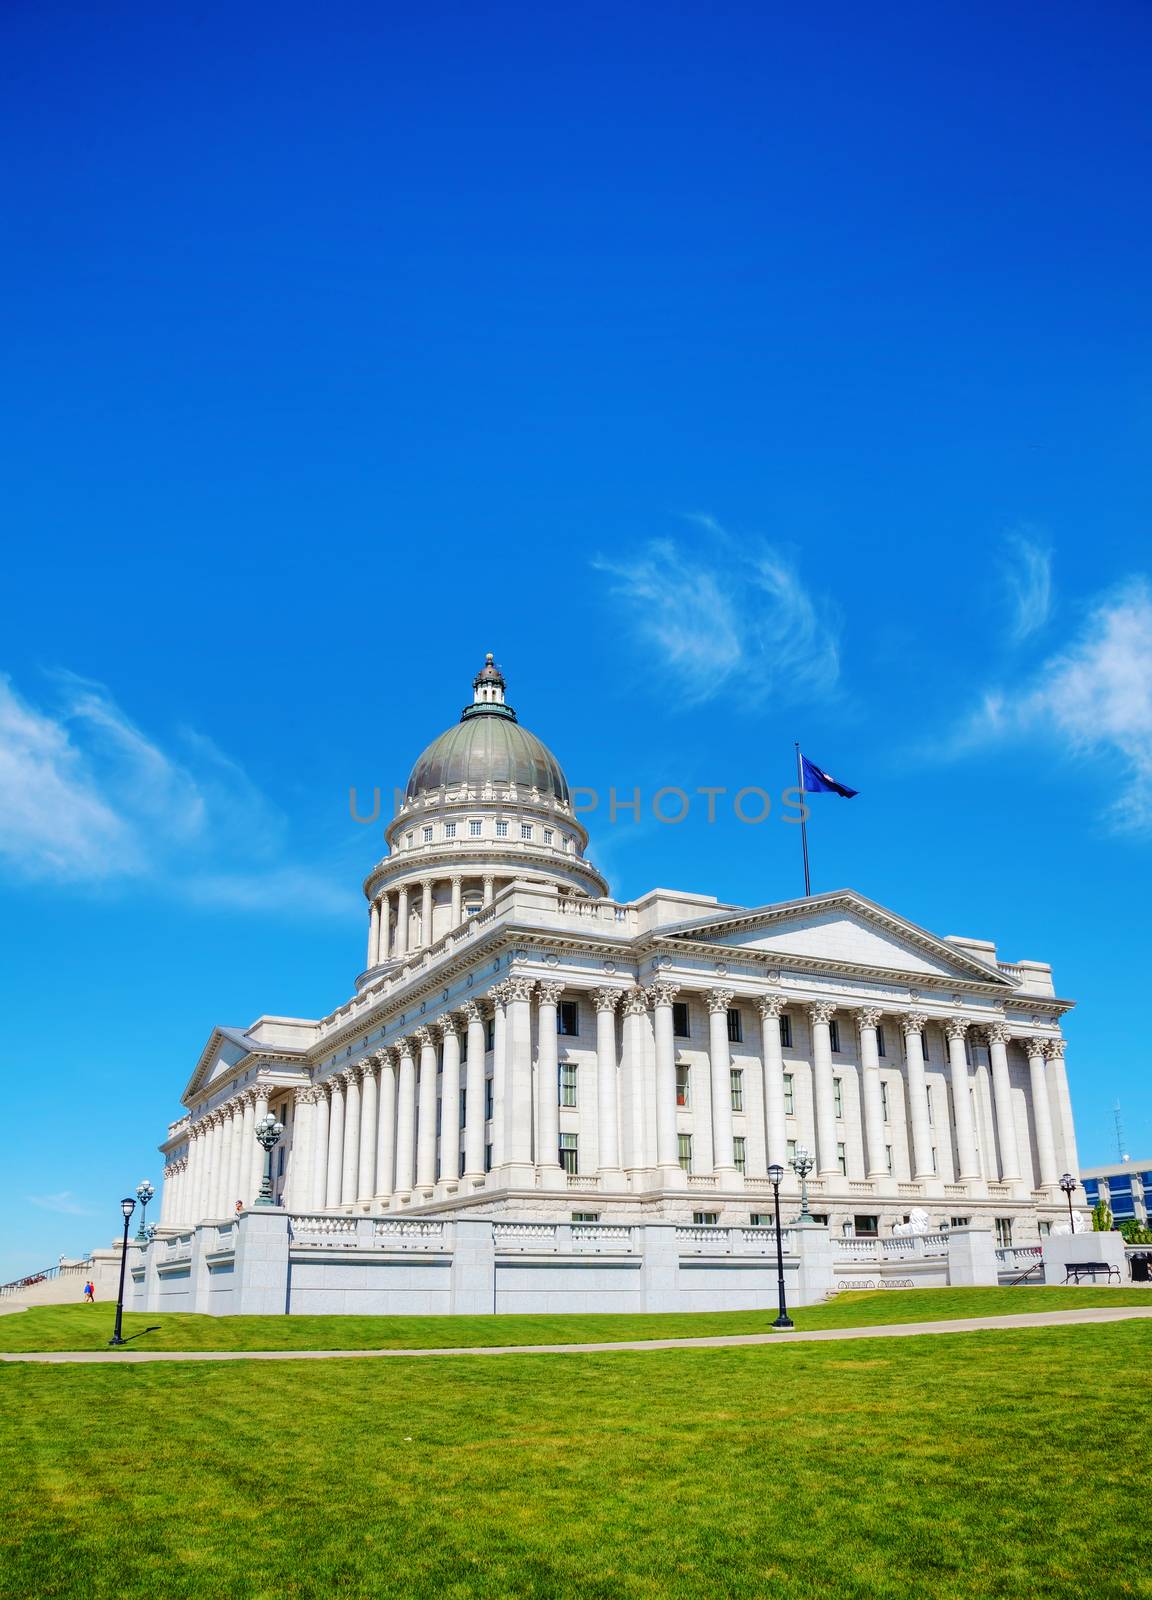 Utah state capitol building in Salt Lake City by AndreyKr